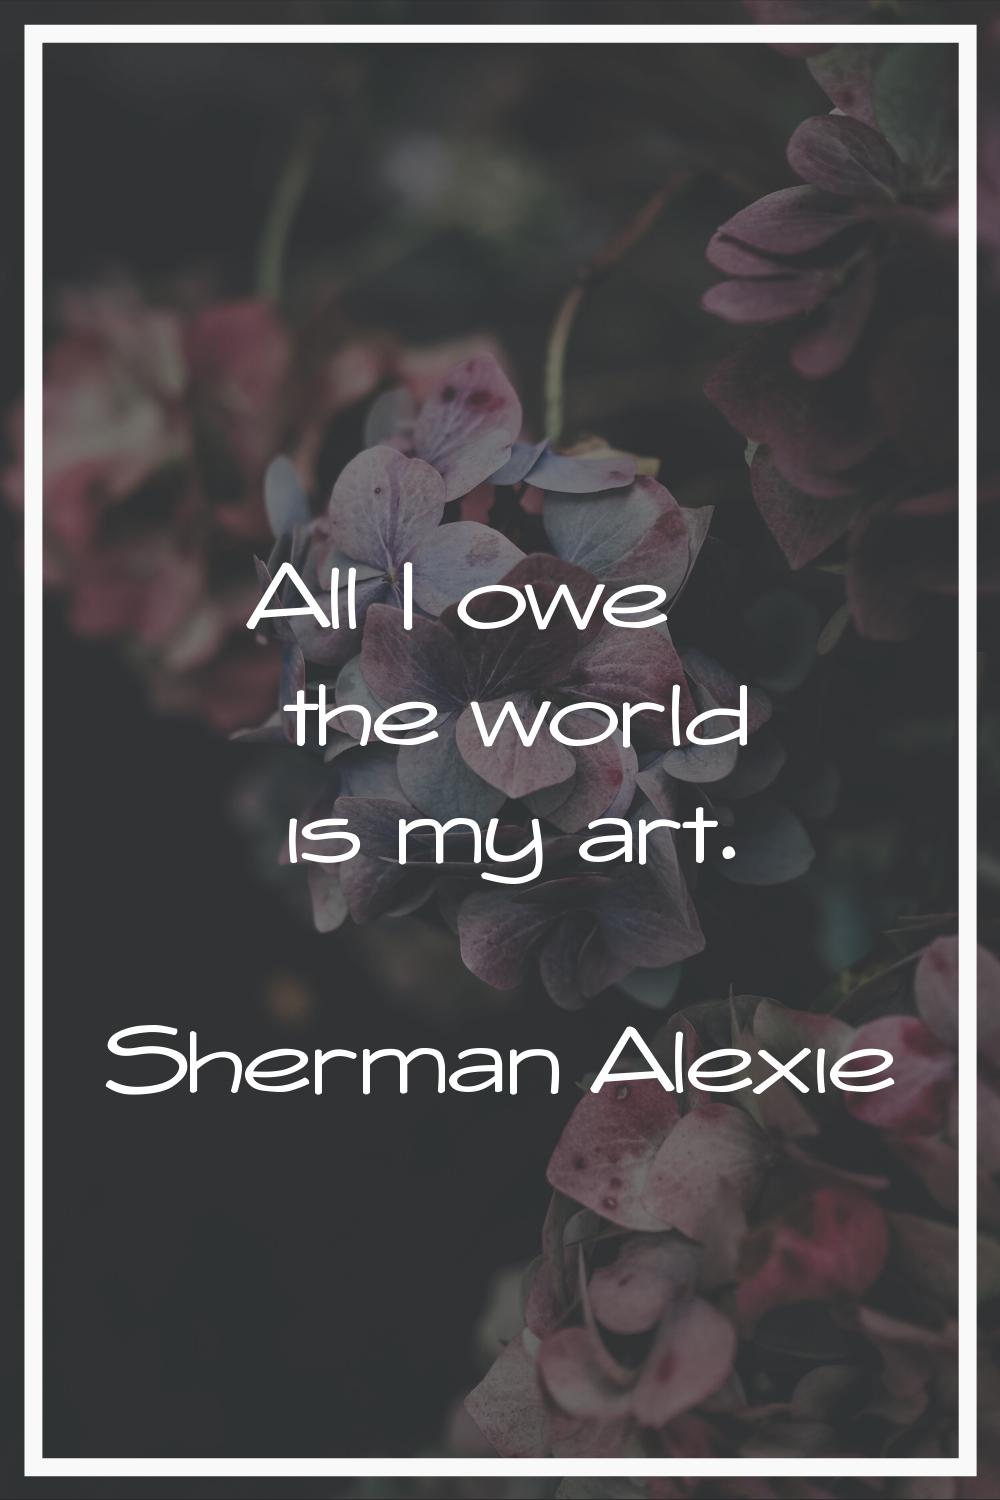 All I owe the world is my art.